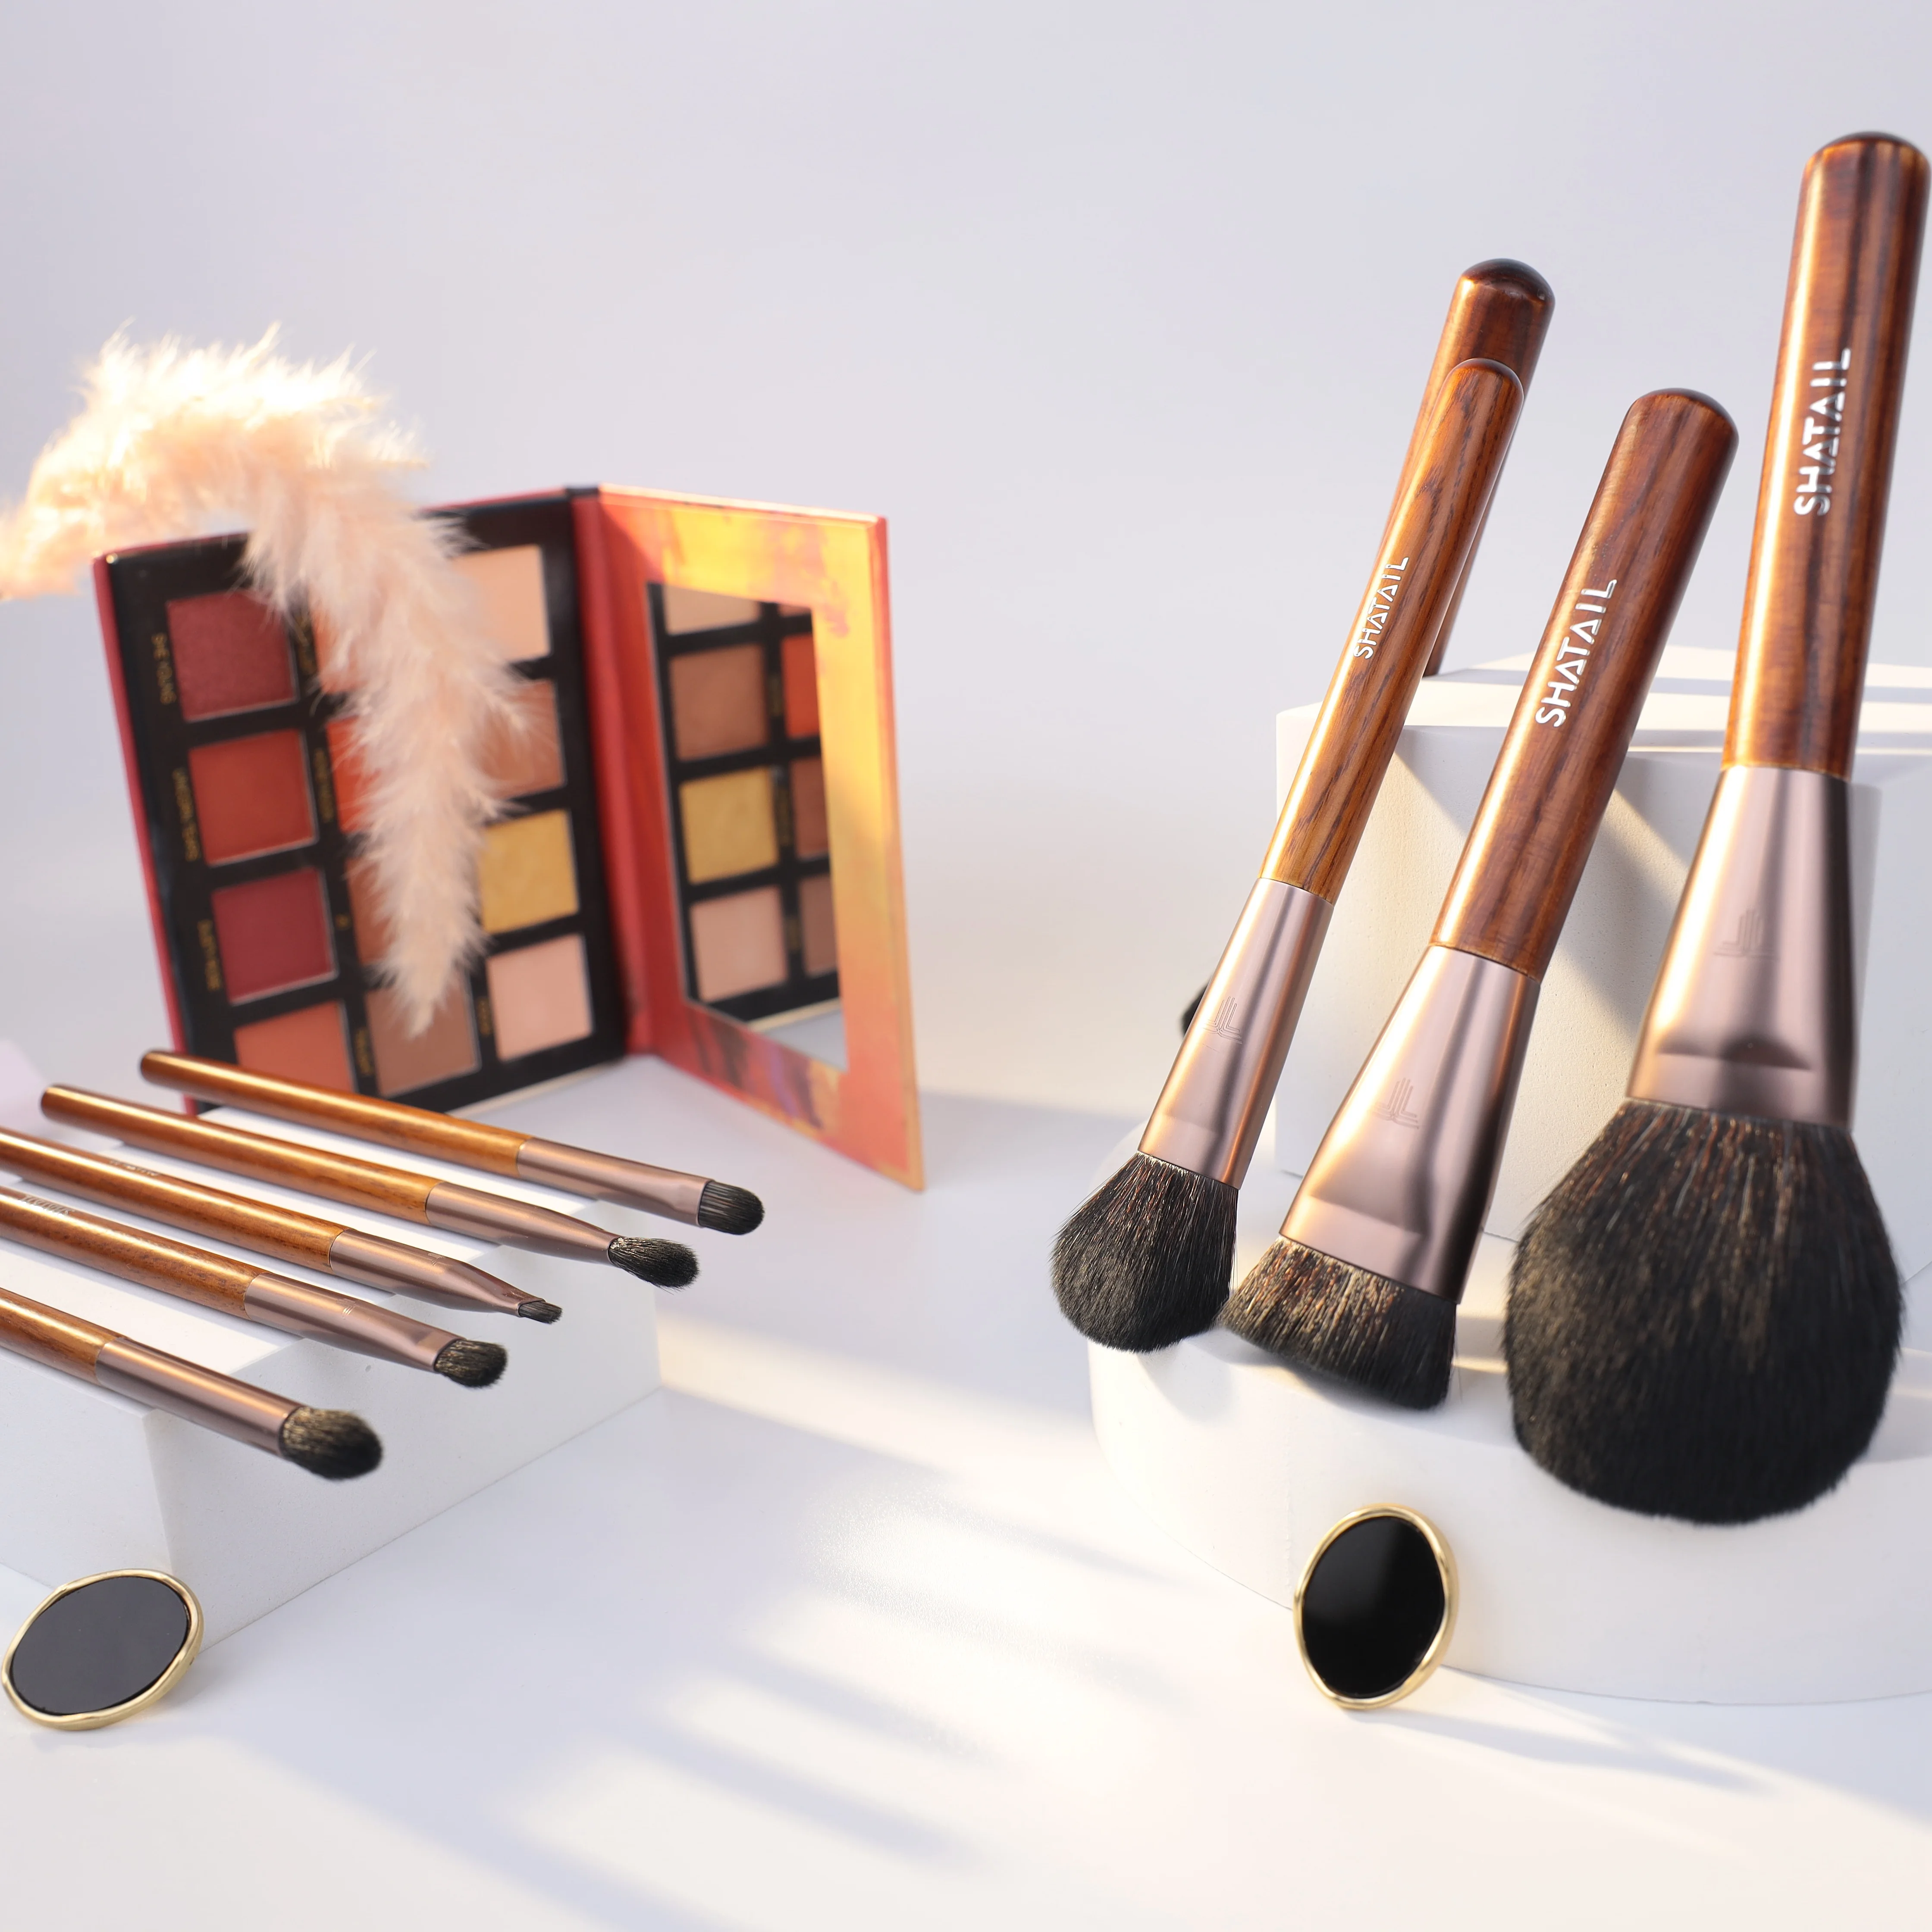 

9 Pieces Private Label Nude Cosmetic Small Foundation Mini Make Up Brush,Make Up Brush Custom Logo,Make Up Brush Goat Hair Sets